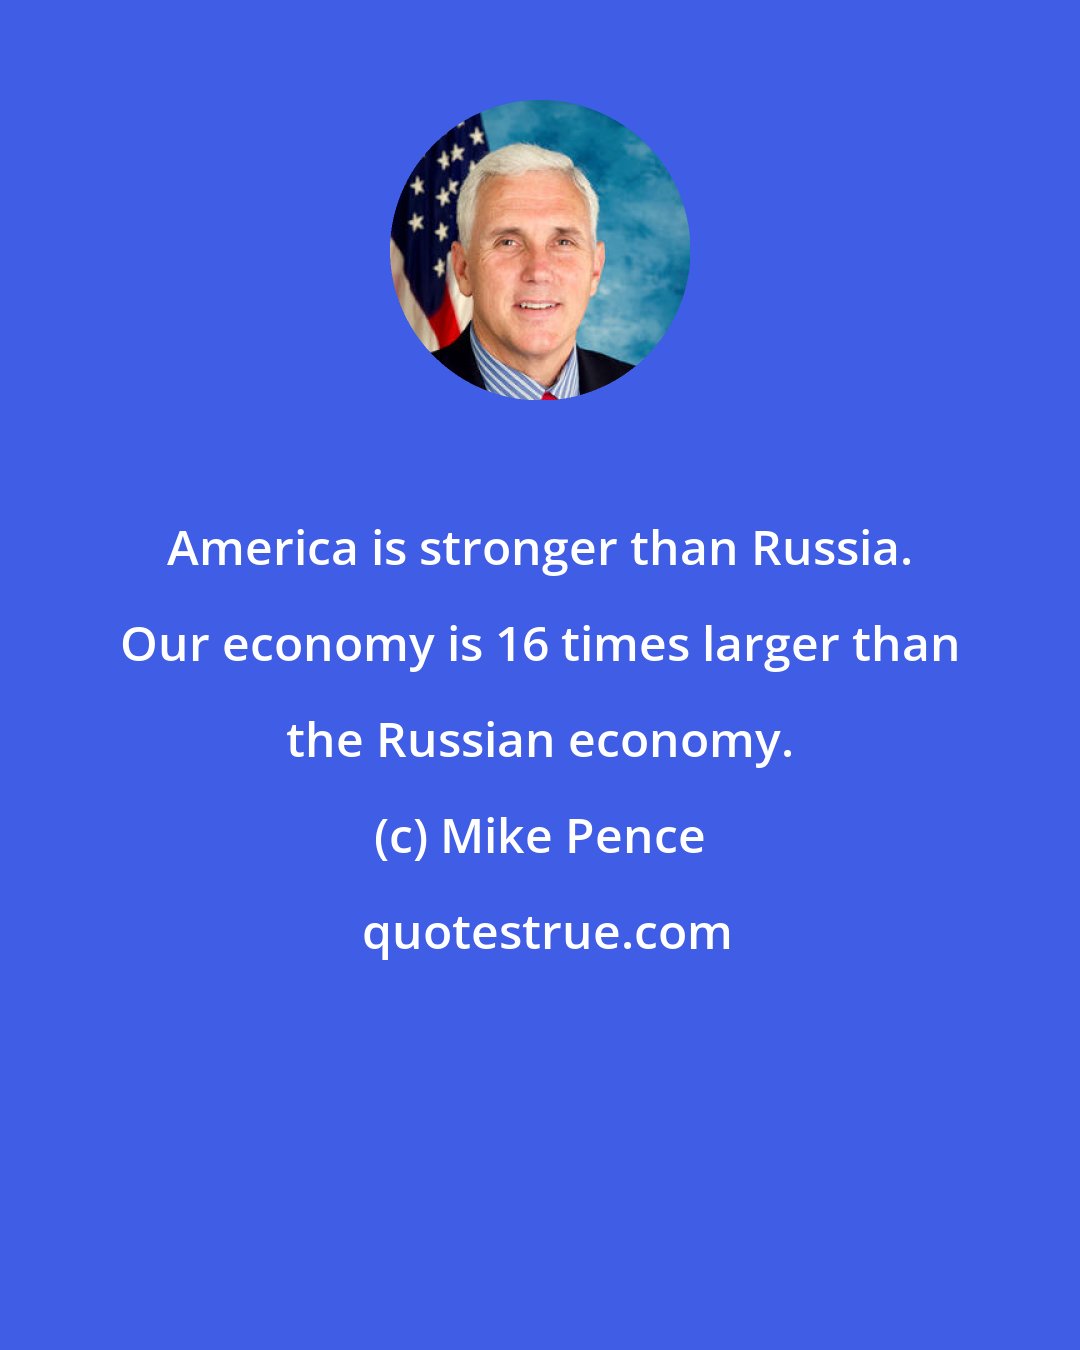 Mike Pence: America is stronger than Russia. Our economy is 16 times larger than the Russian economy.